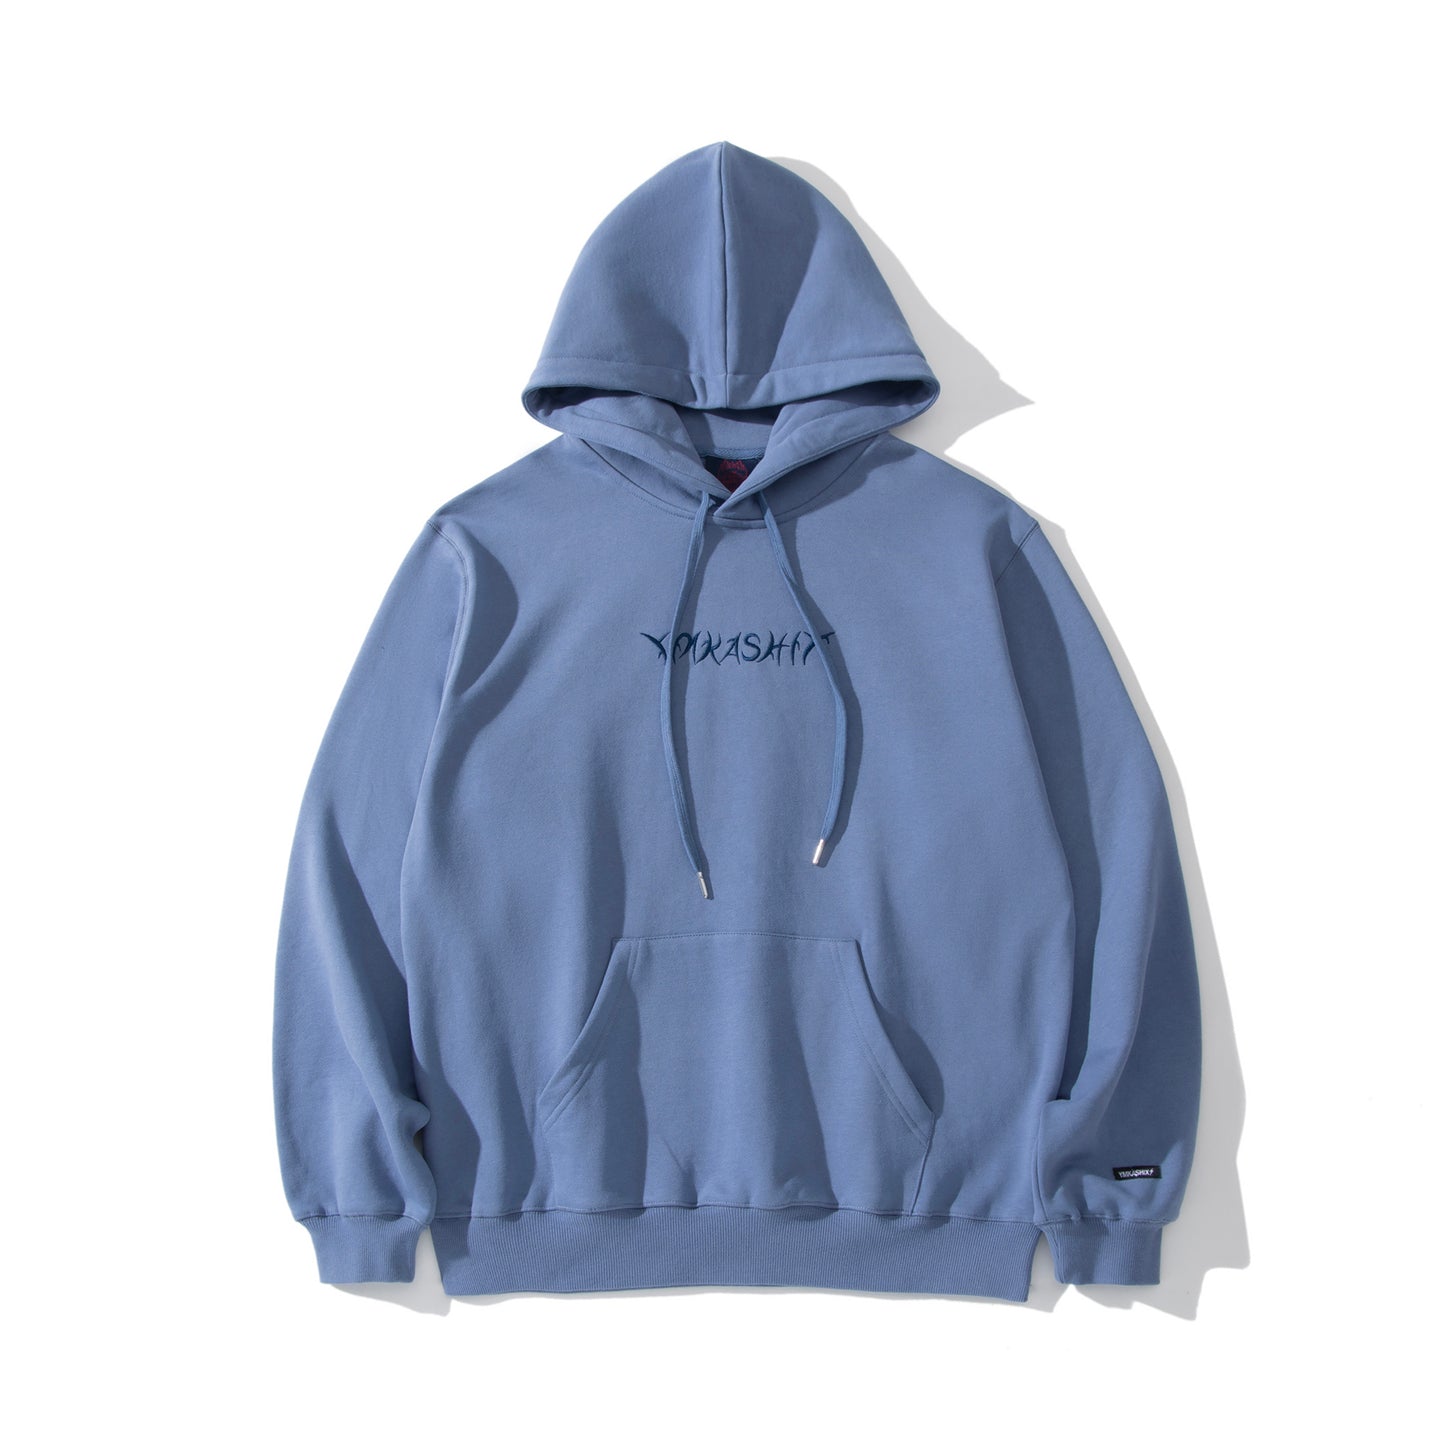 Hoodie Hellcome to Firedise, Dusty Blue